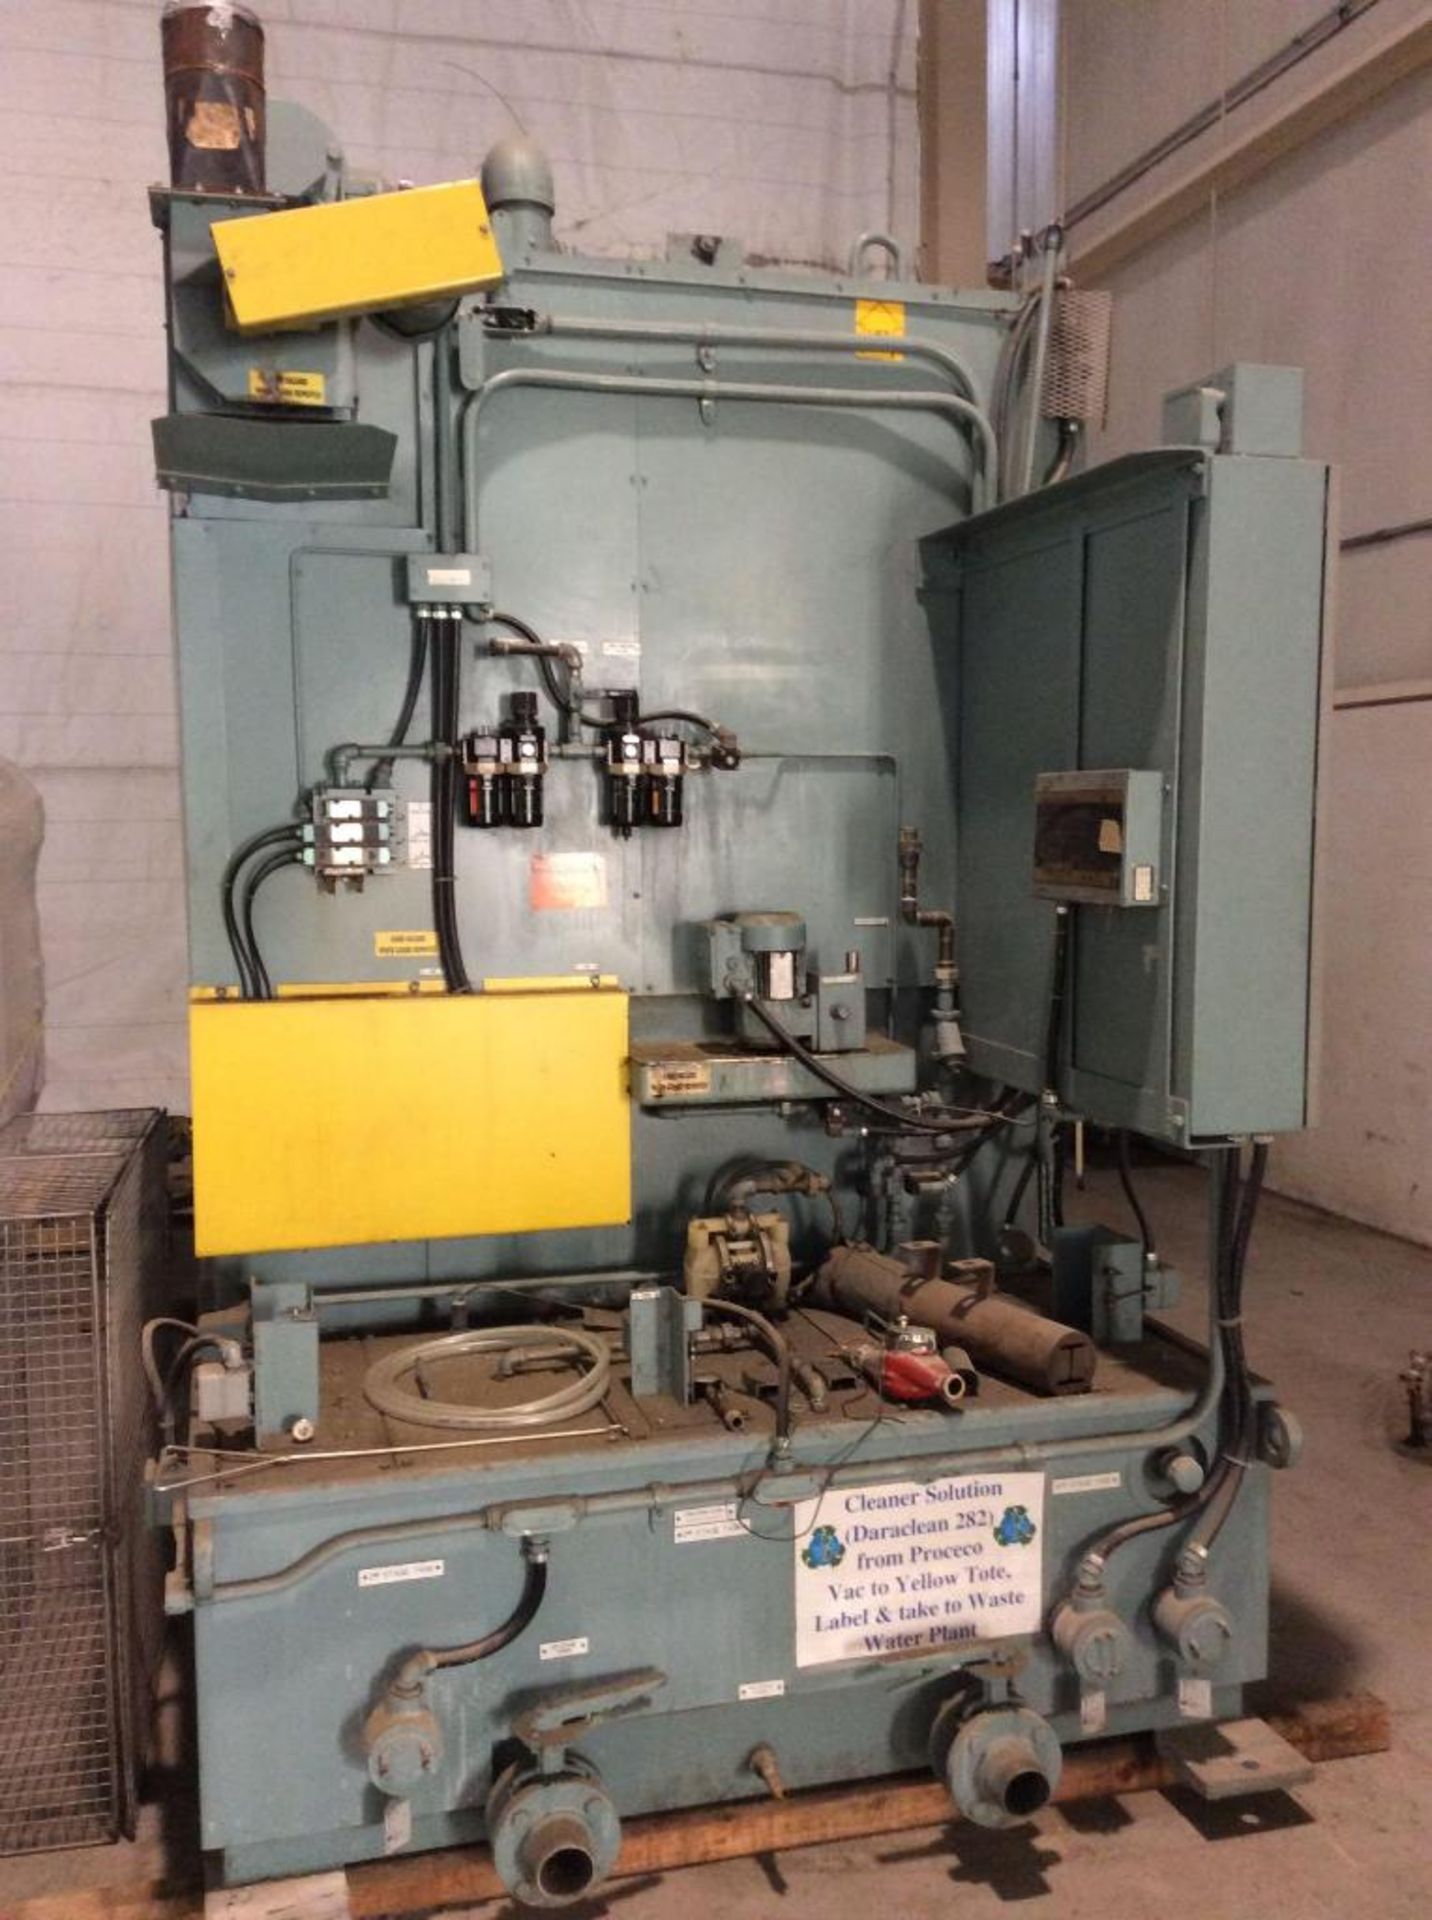 Proceco 48" rotary, 2-stage parts washer, mn FTT-50-48-E-2500-2-2RD-HBO-SS301, sn 96248, Siemens - Image 6 of 6